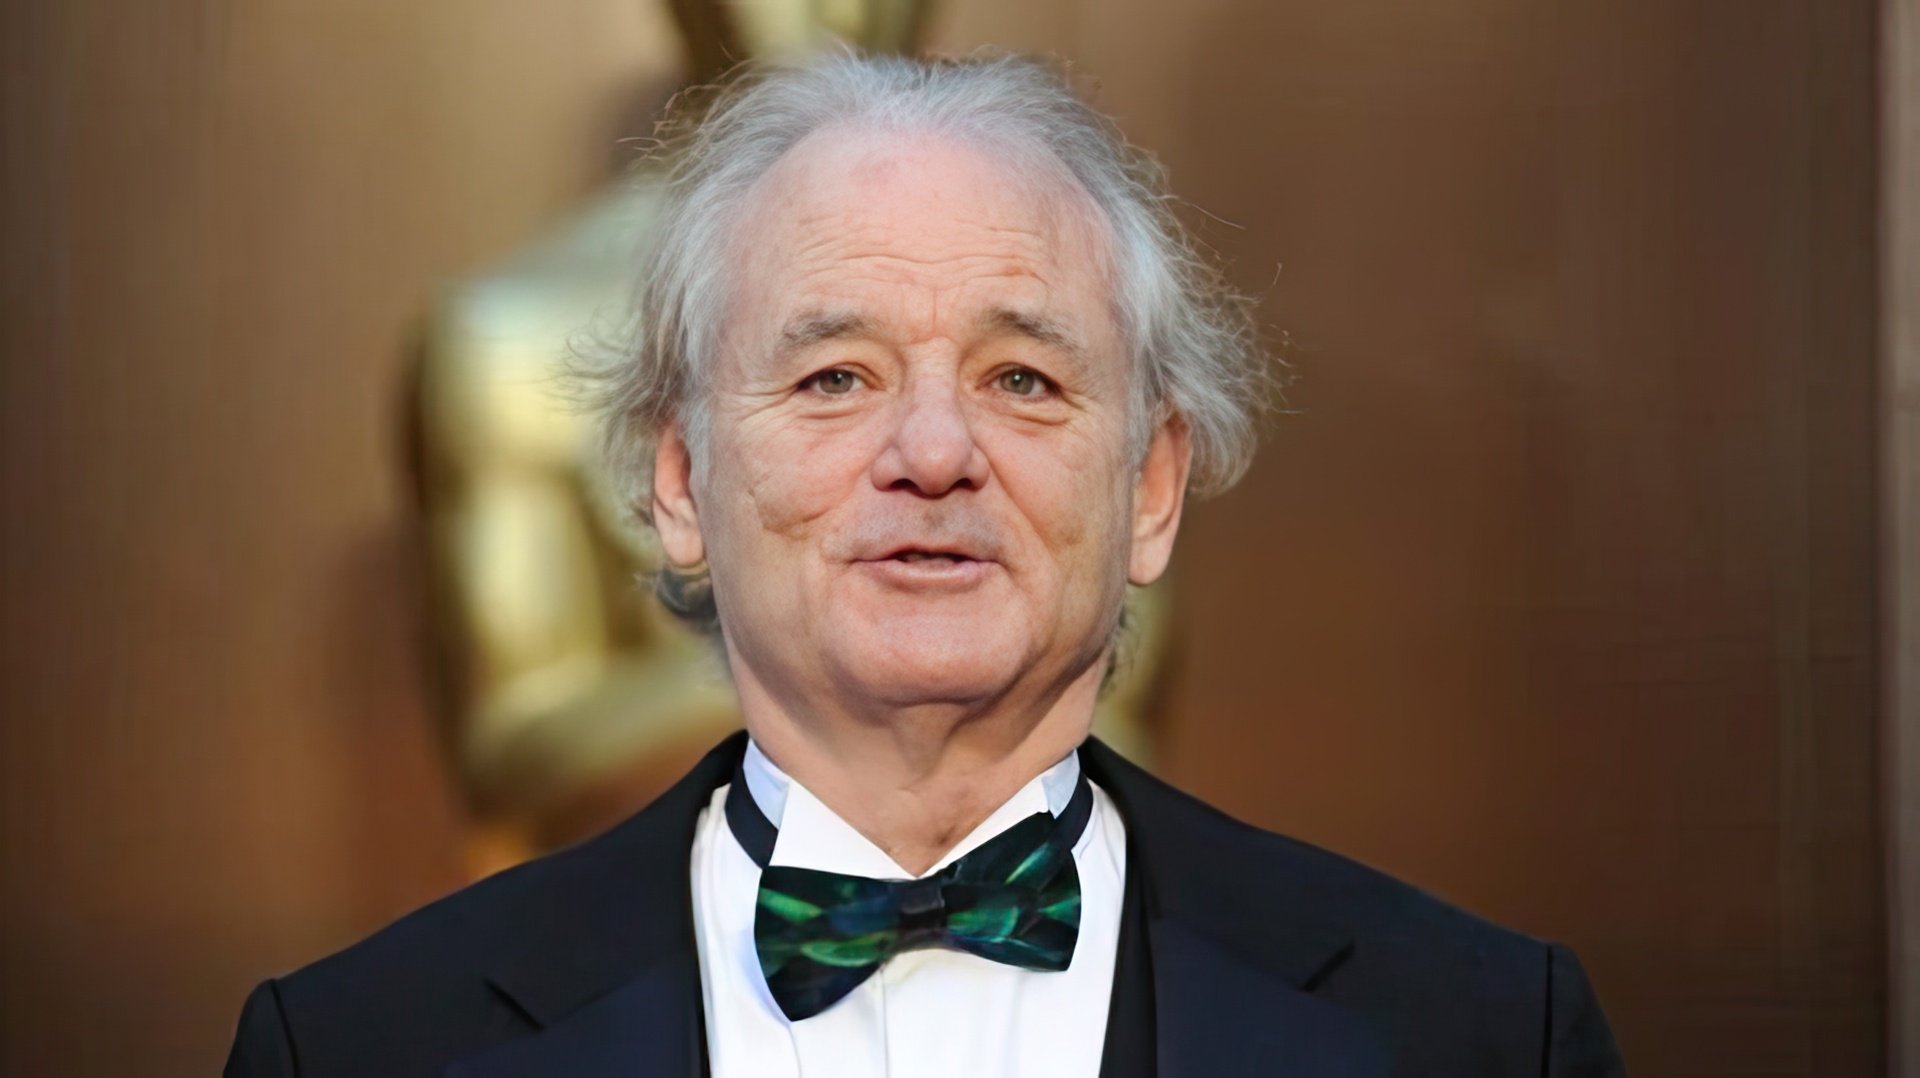 In the Picture: Bill Murray